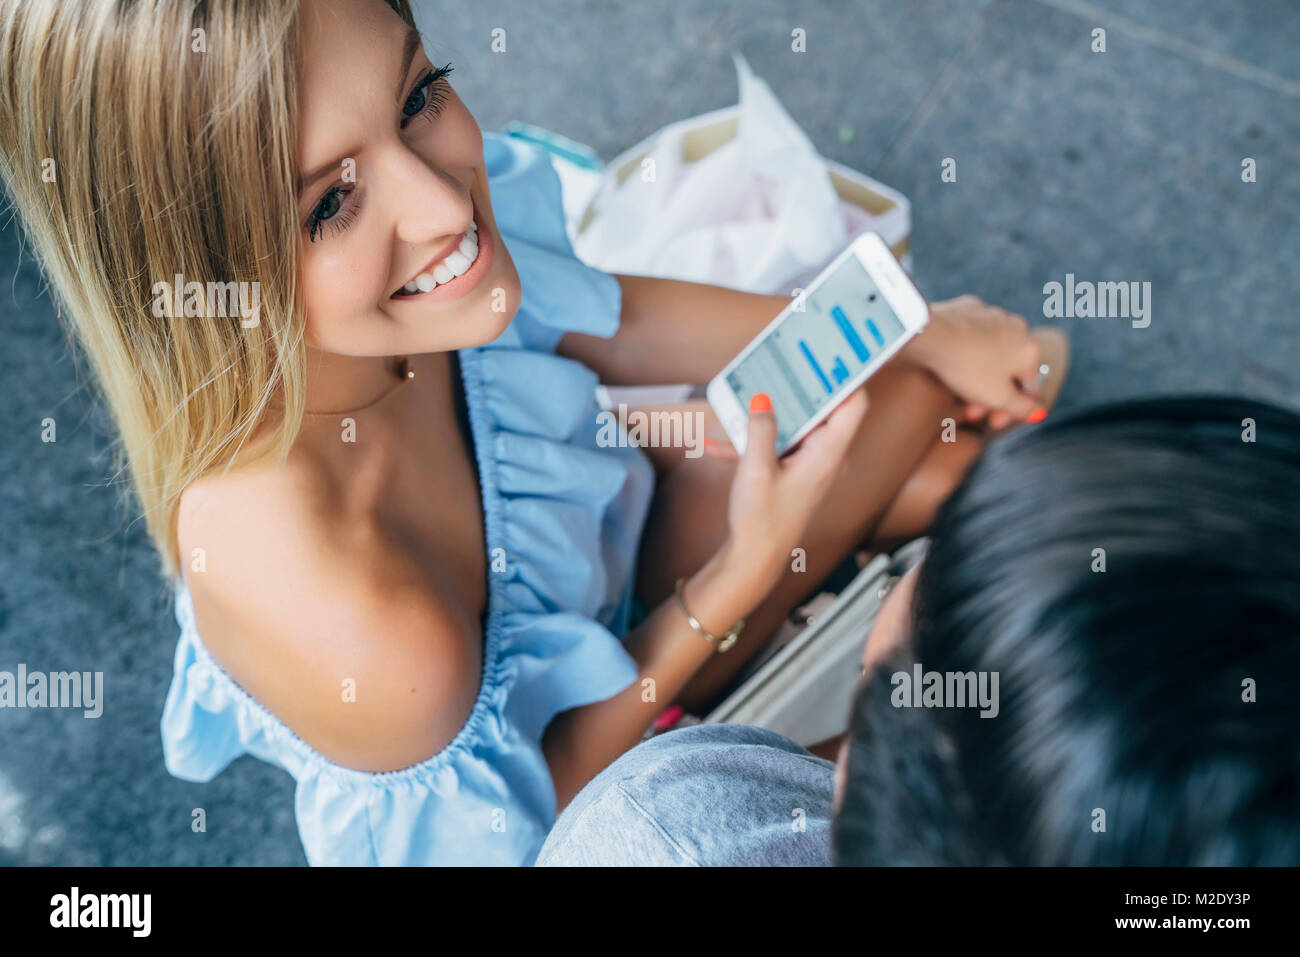 Smiling Caucasian woman texting on cell phone near man Stock Photo